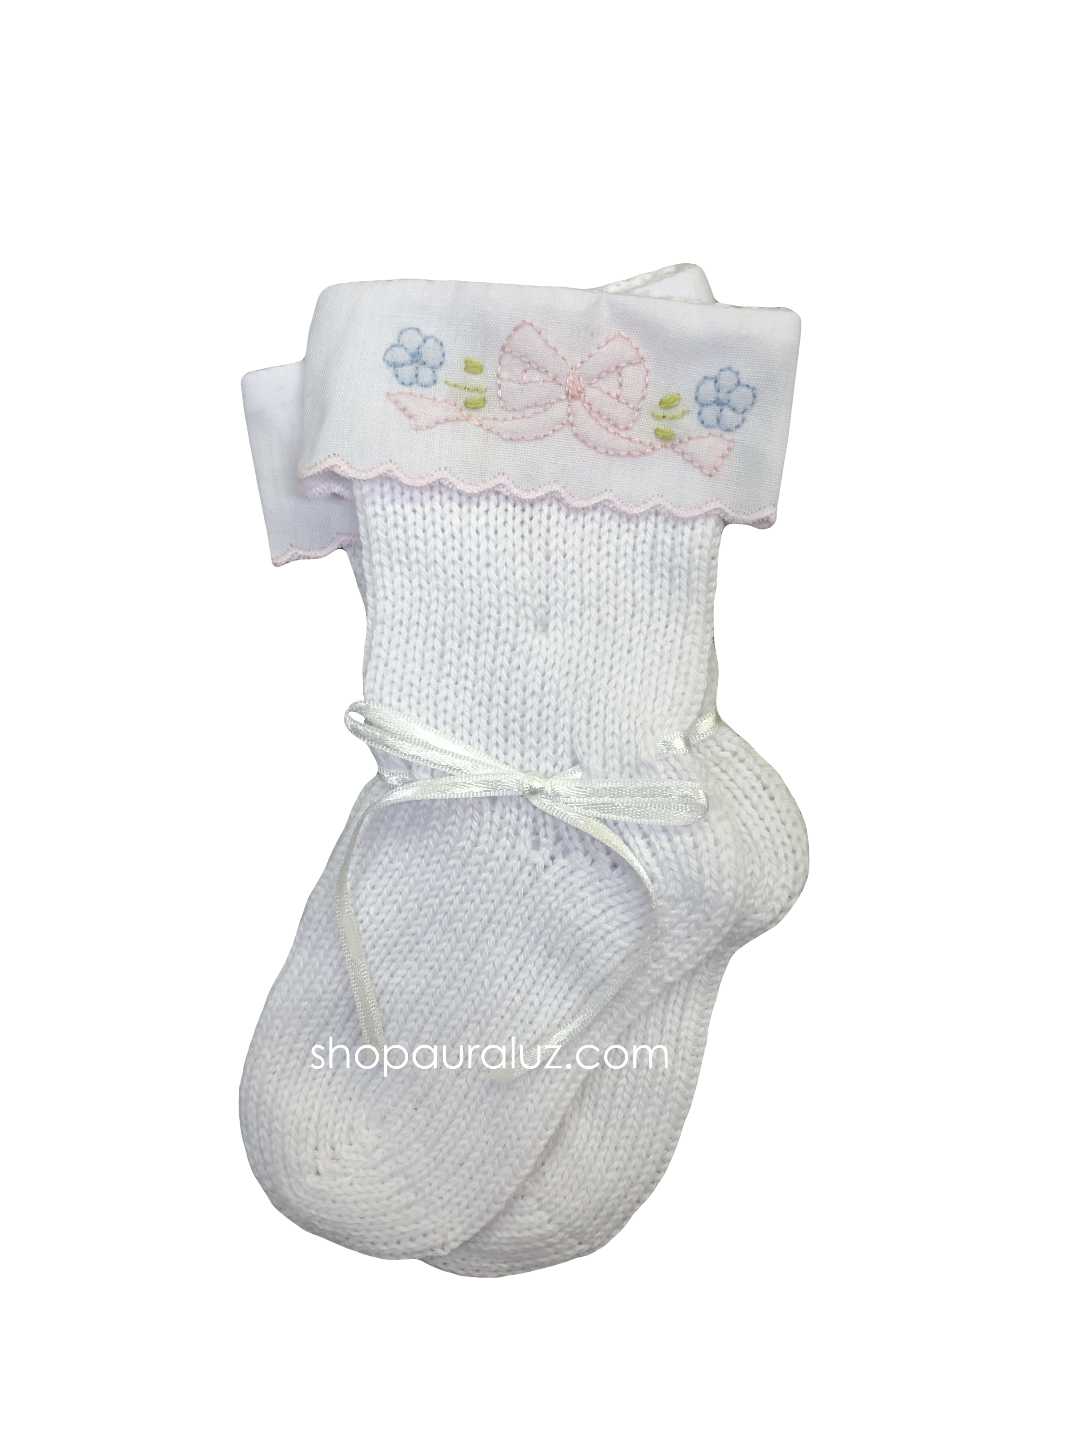 Auraluz Knit Socks...White with pink scallop trim and embroidered bow